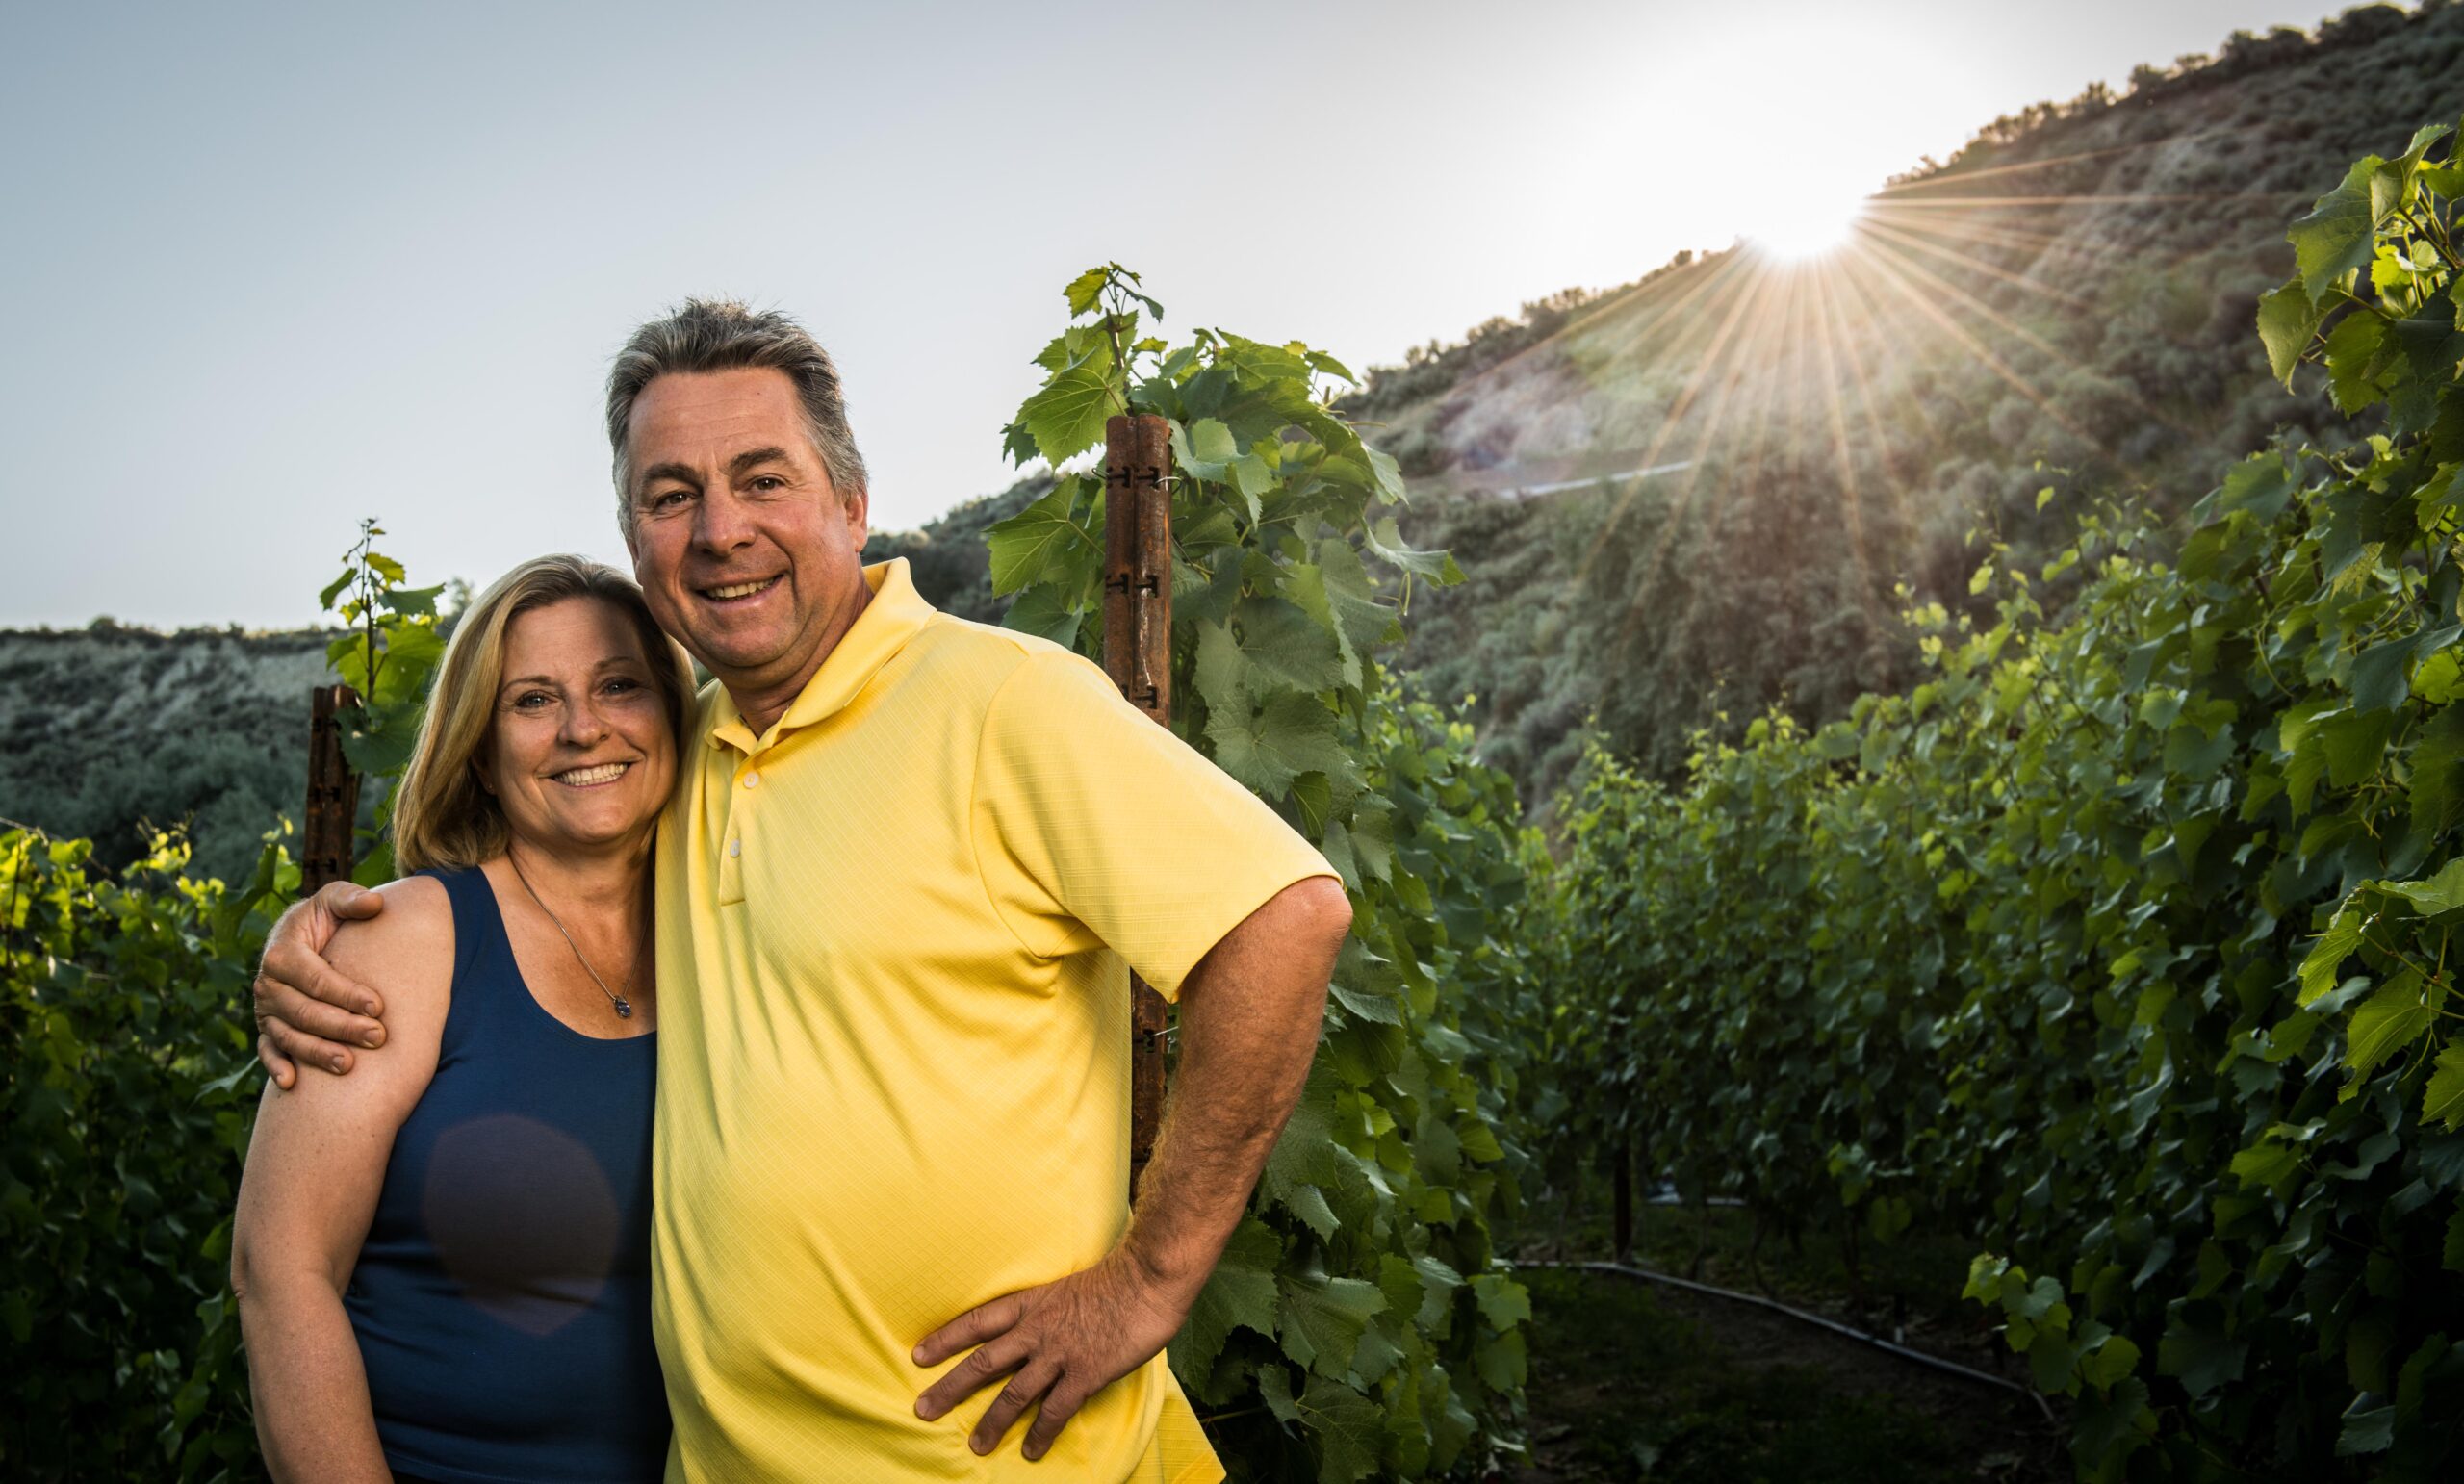 Owners of Poplar Grove winery, Tony & Barb Holler